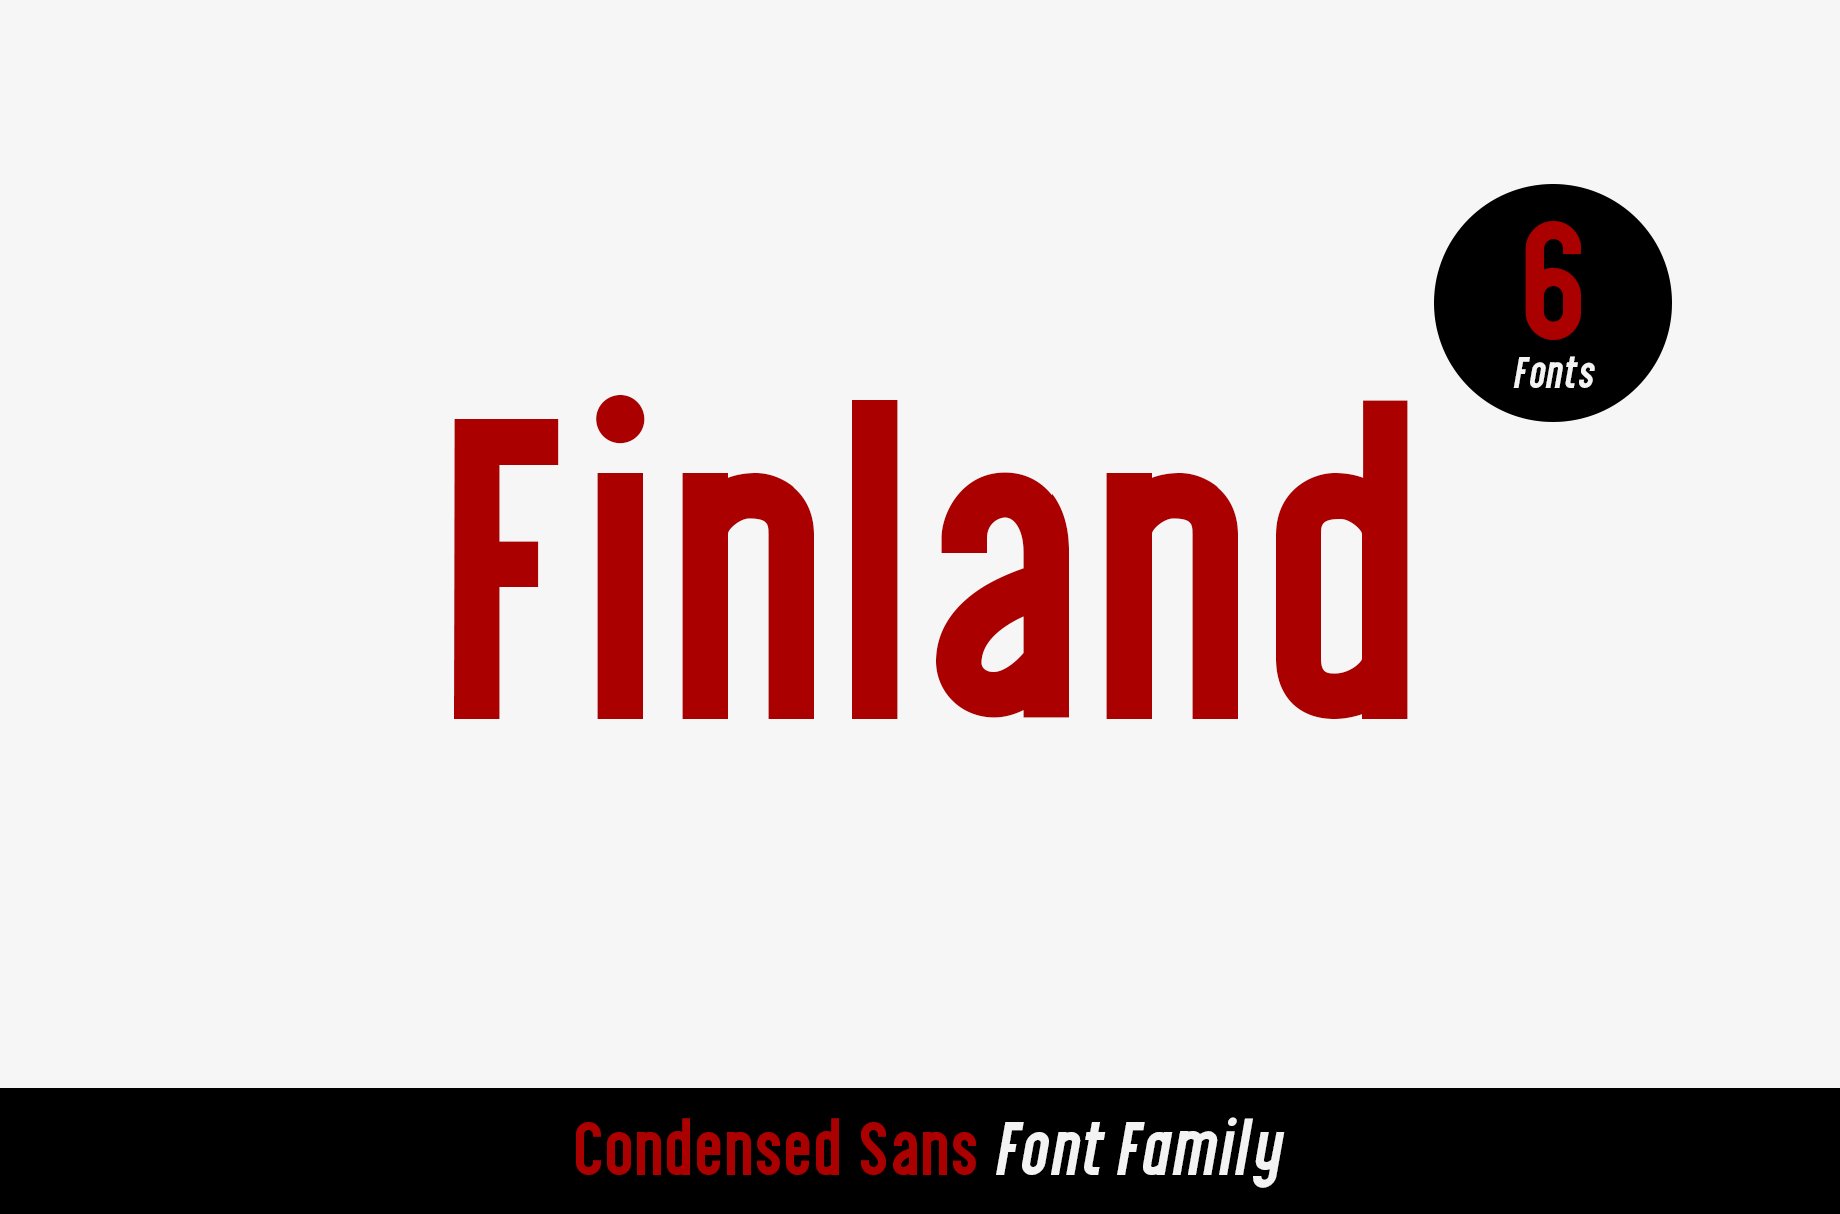 Finland Font Family cover image.